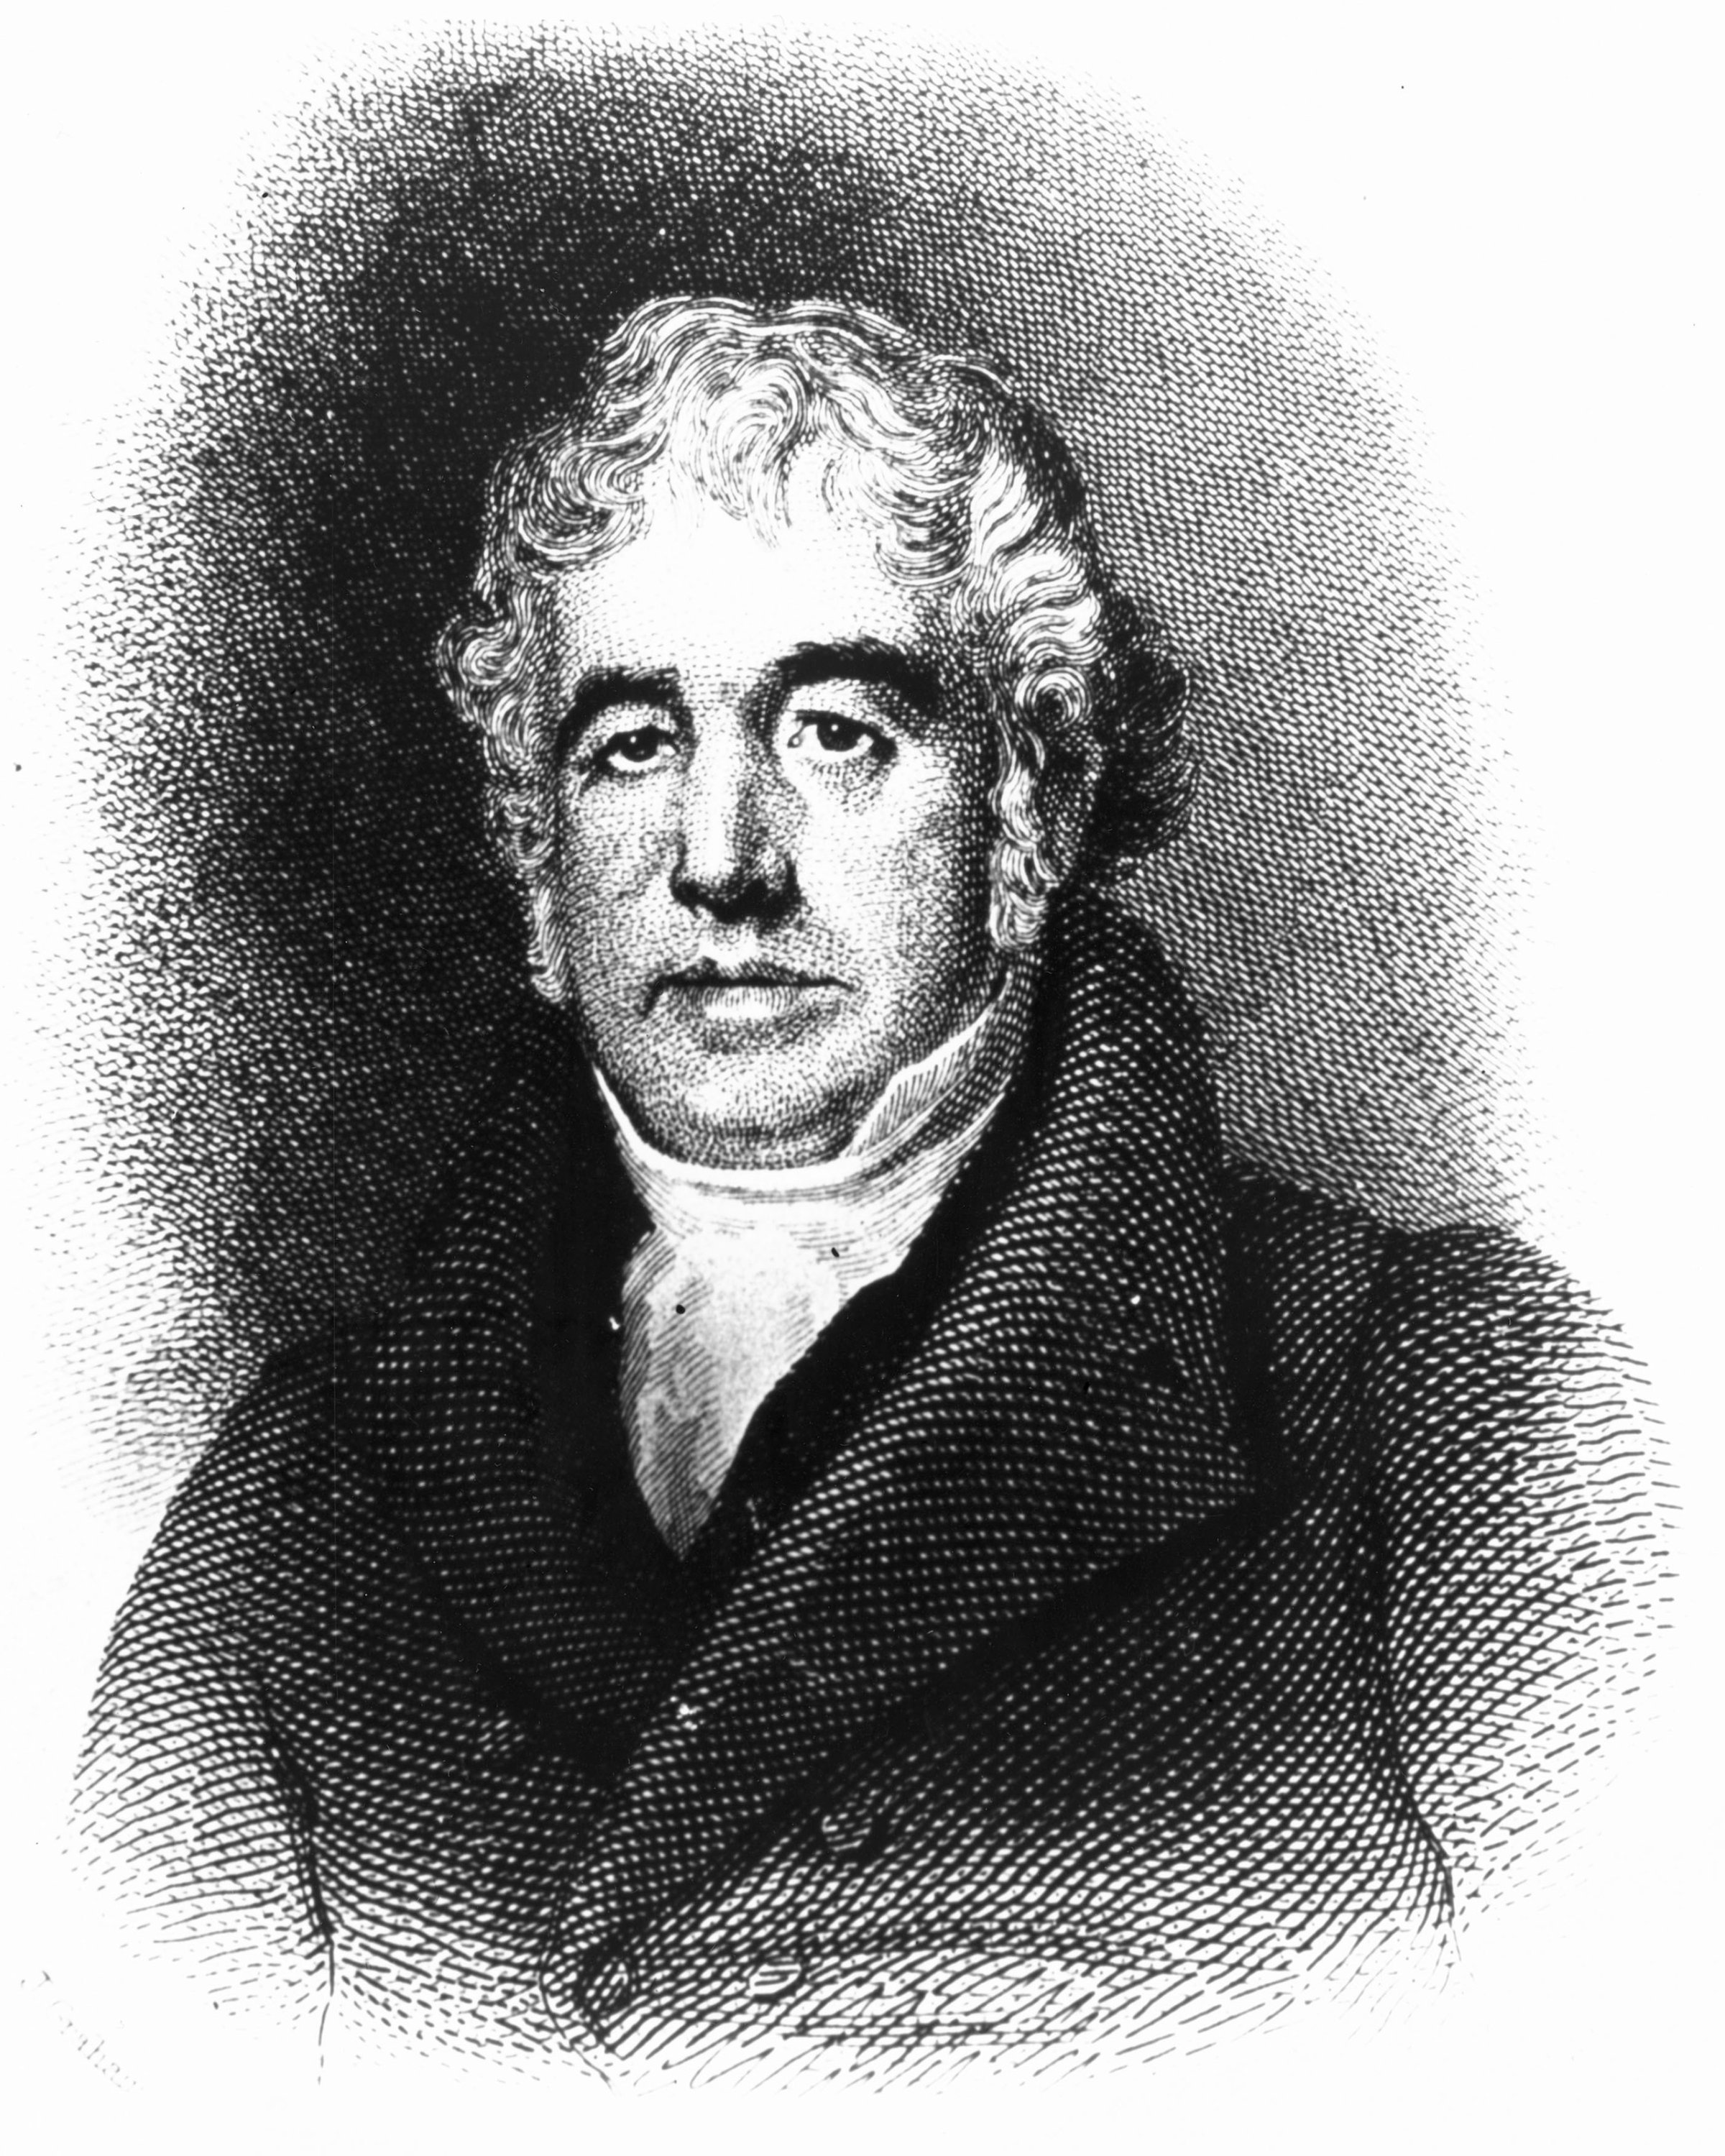 An engraving of Charlies Macintosh, who in 1823 successfully produced the first waterproof cloth when he bonded together two pieces of woolen cloth with a solution of dissolved india-rubber.